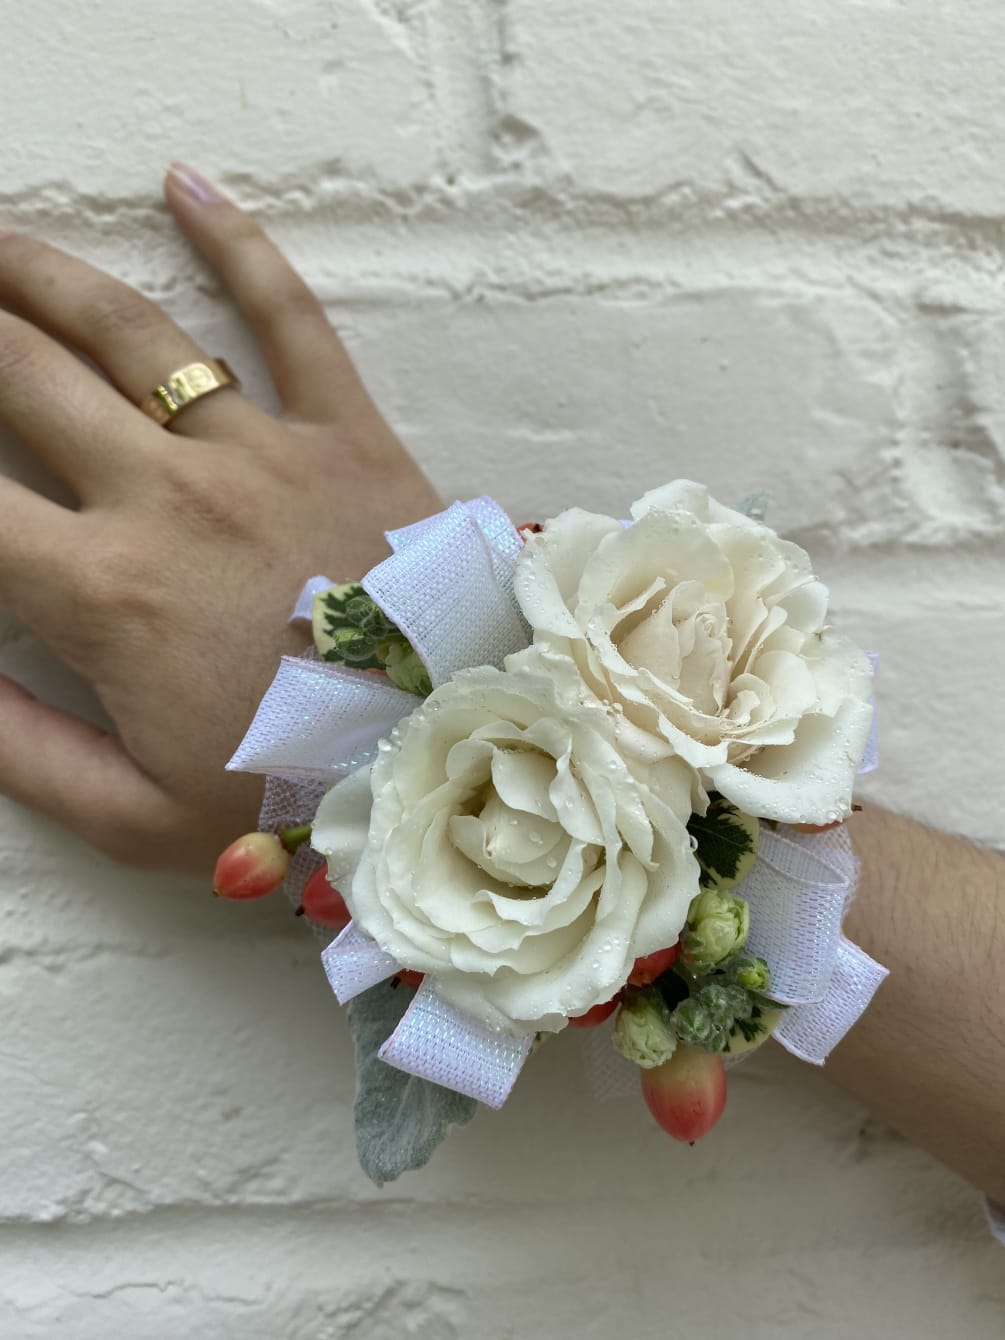 An elegant and simple corsage of white spray roses and hypericum berries.